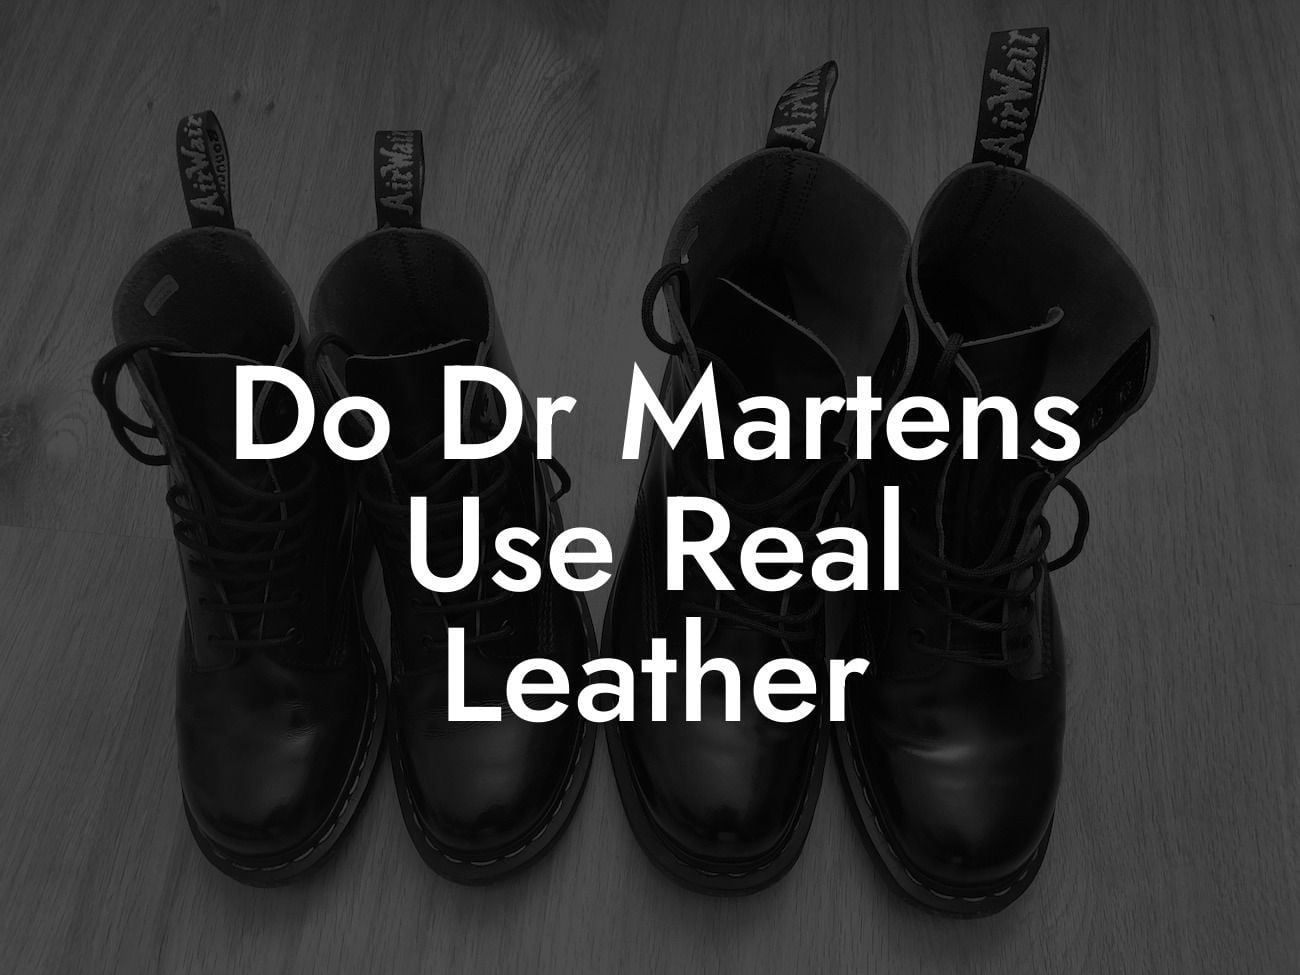 Do Dr Martens Use Real Leather